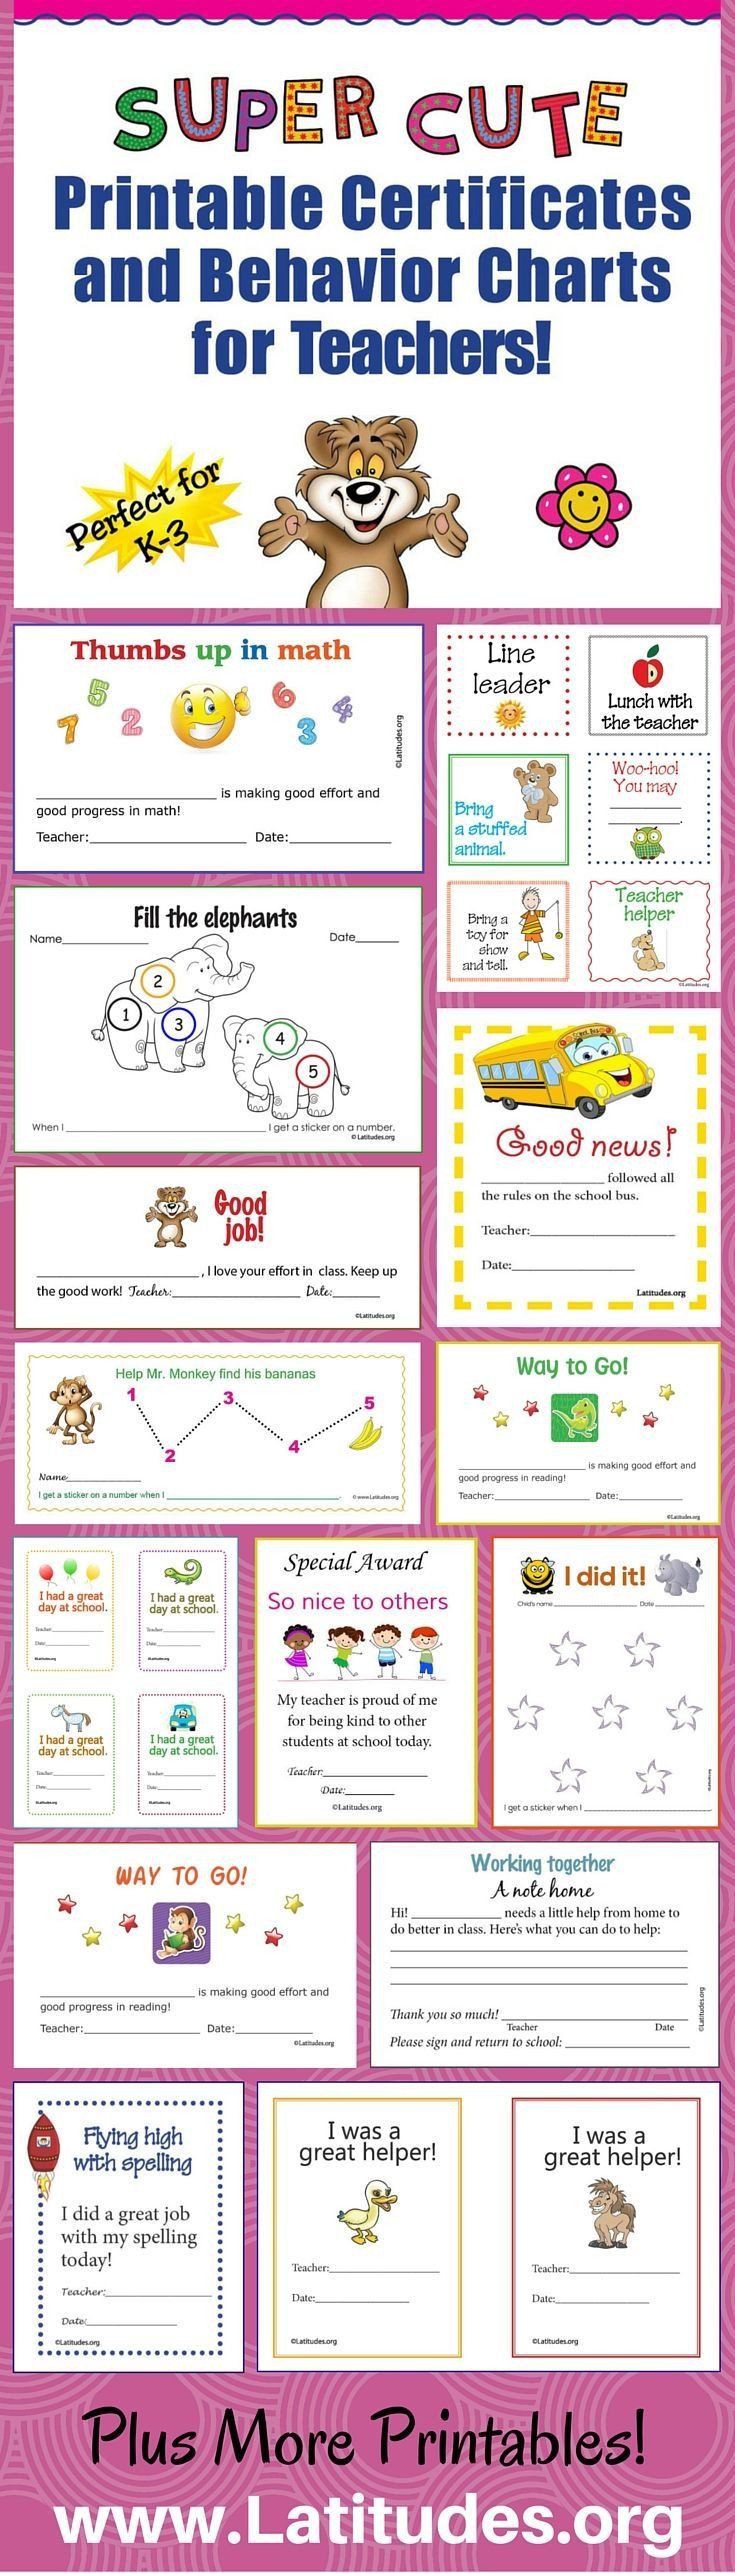 Free Super Cute Printable Certificates and Behavior Charts